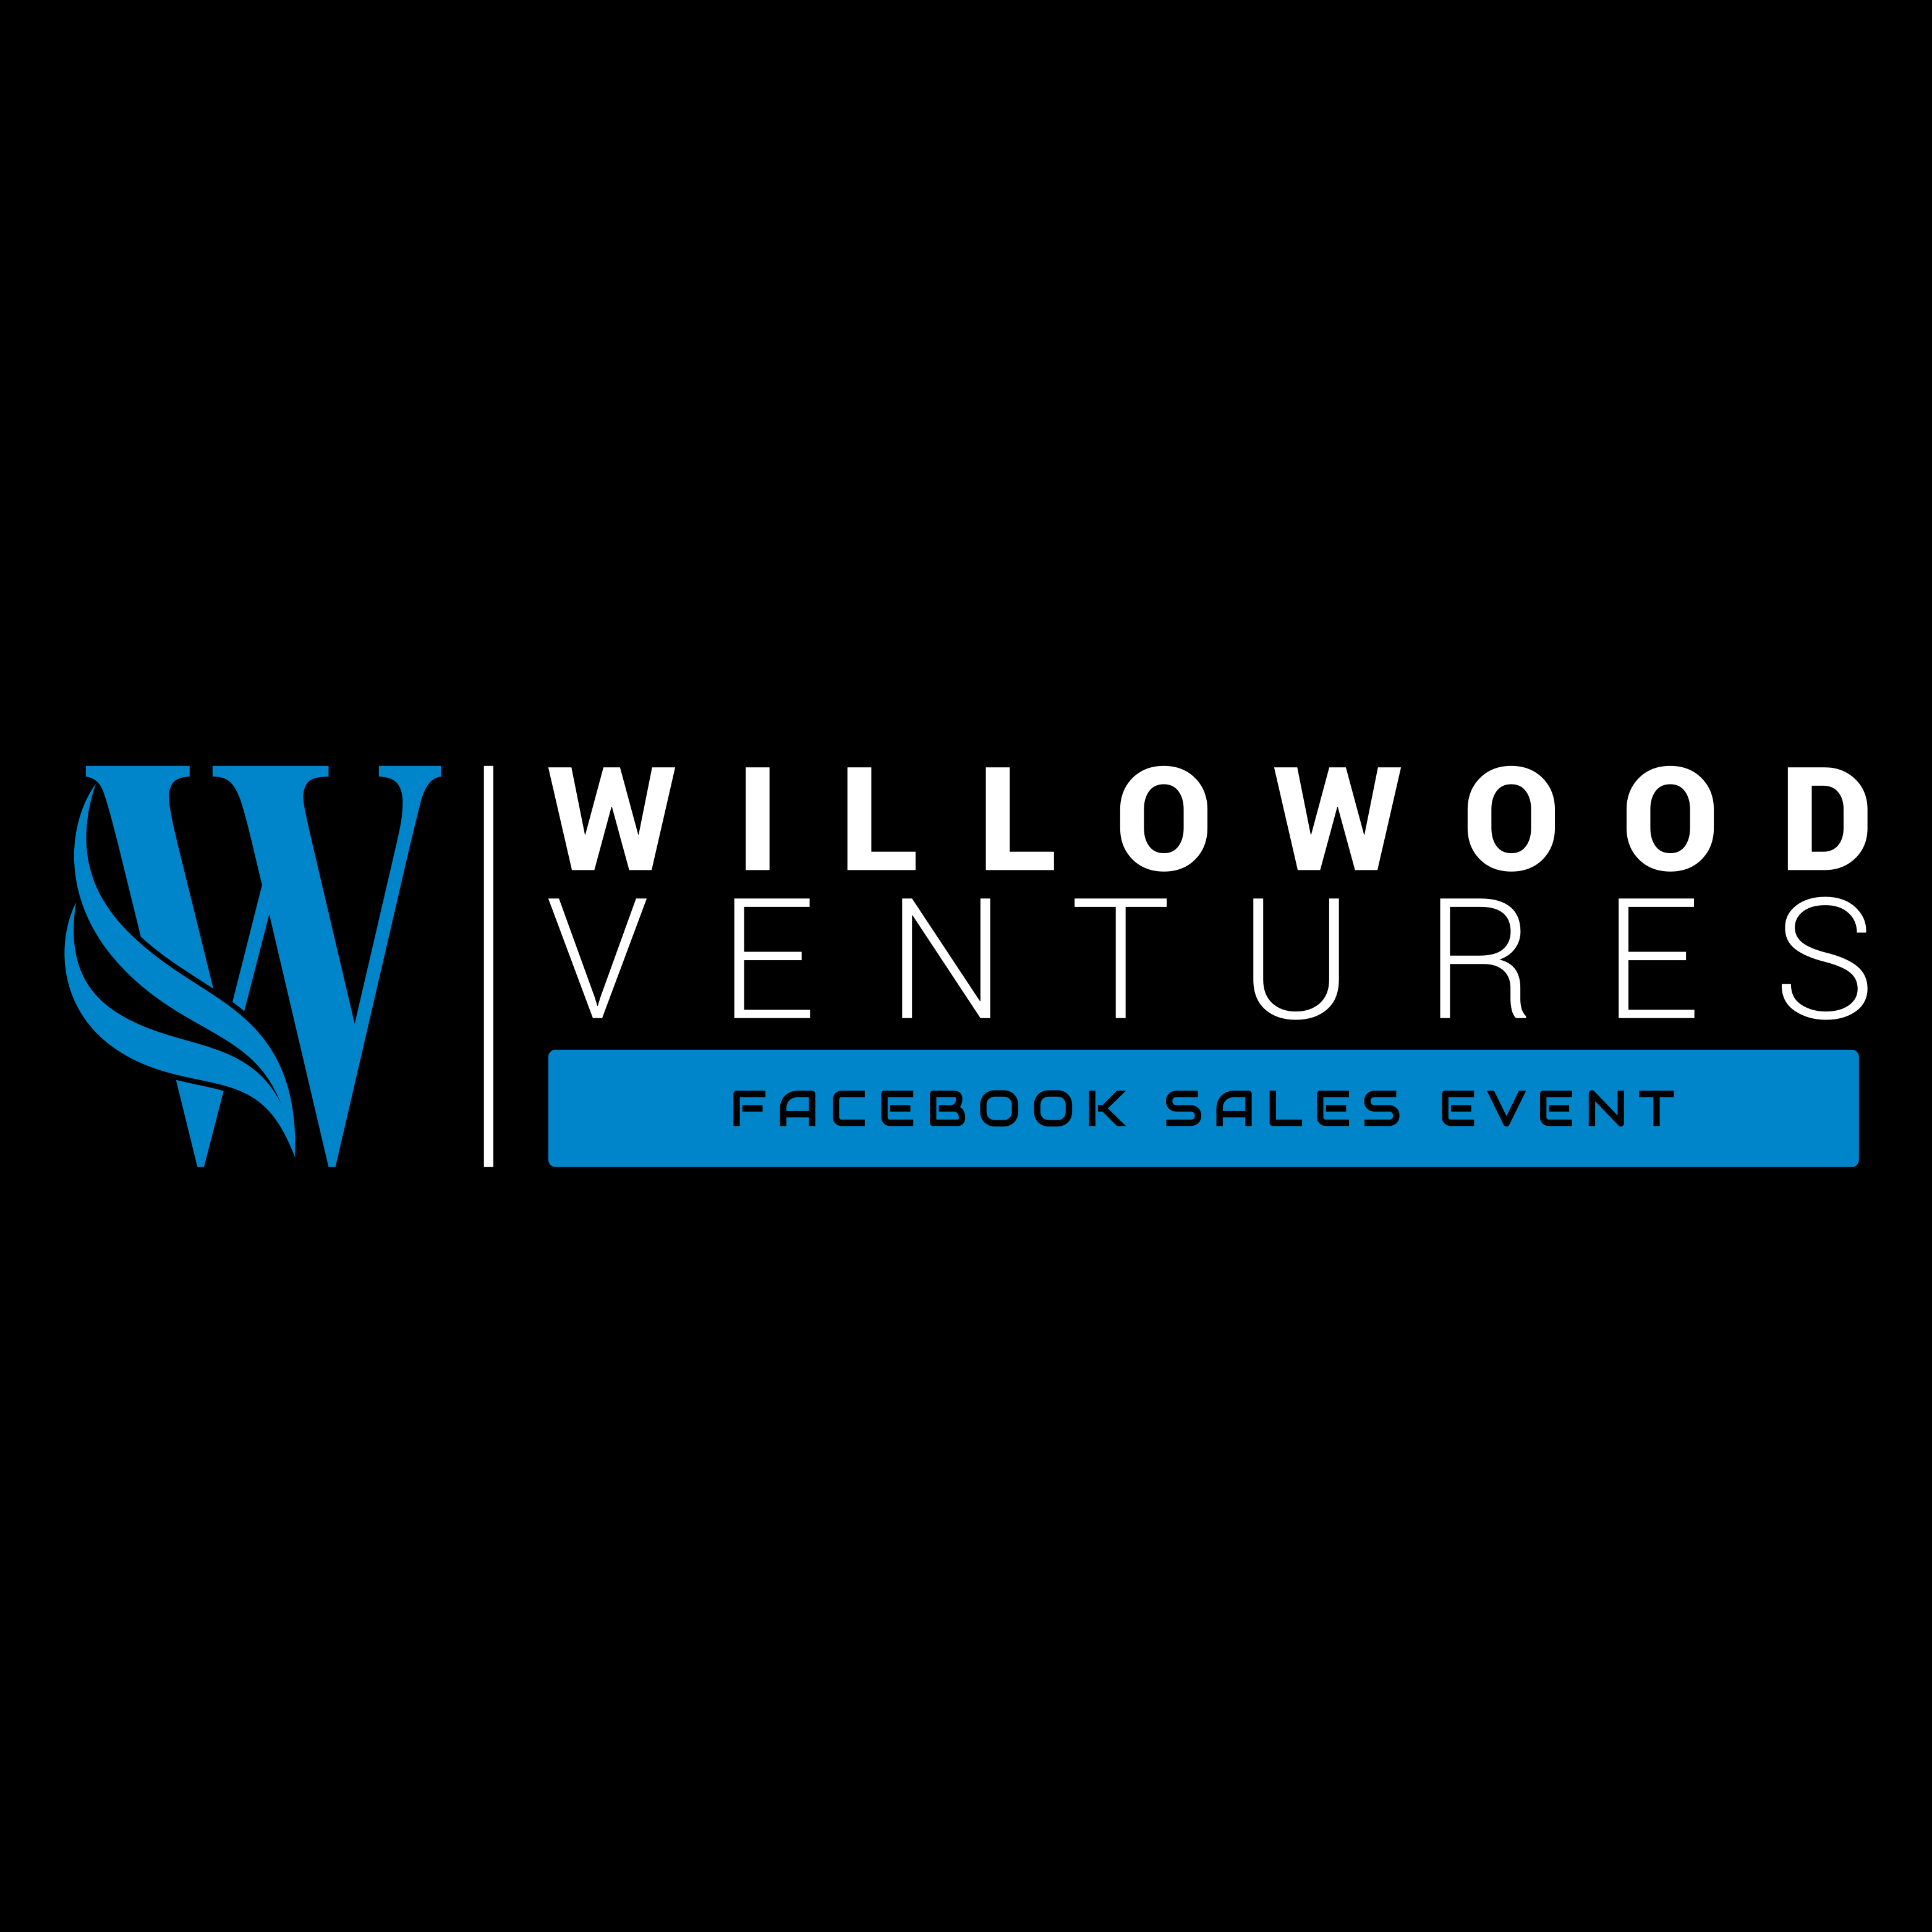 Willowood Ventures Consulting, Marketing, Sales Events